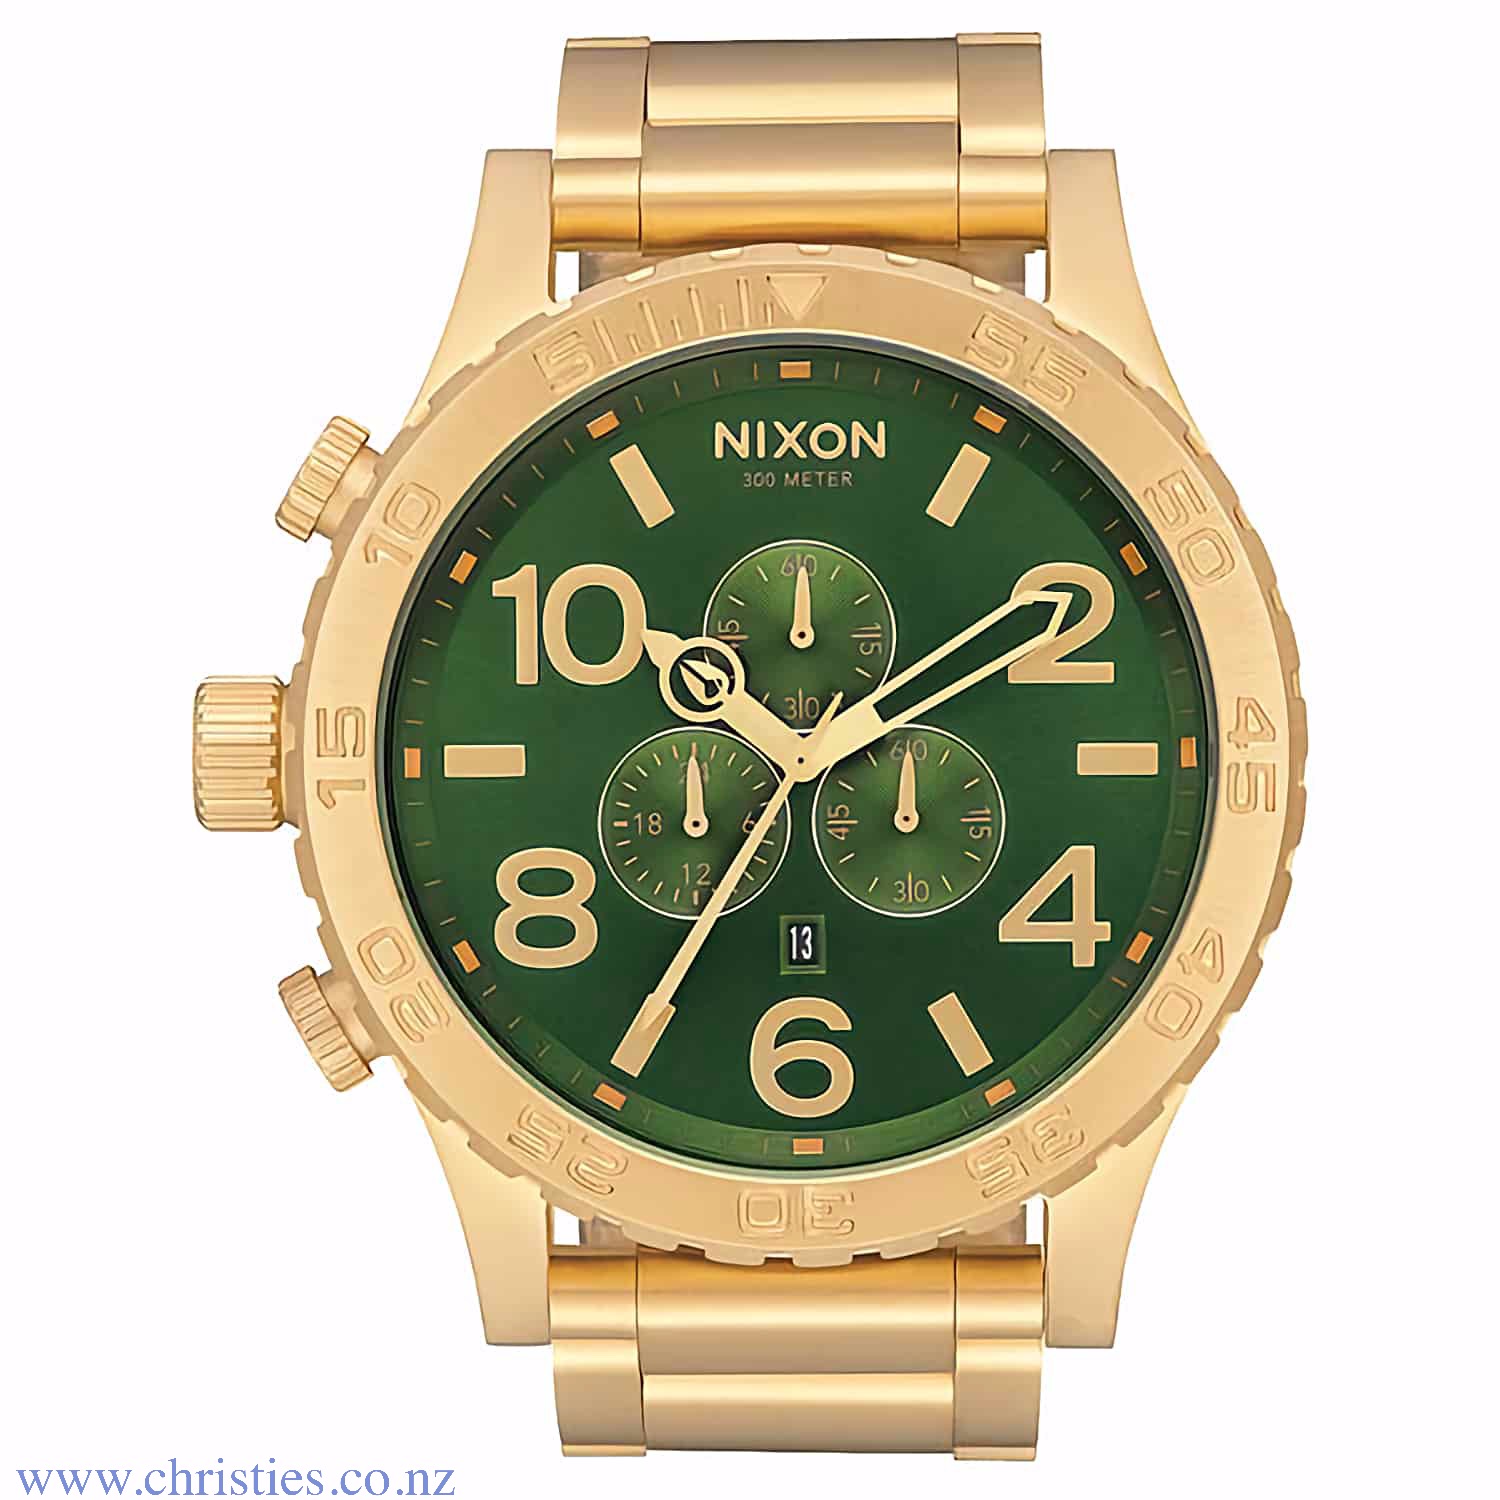 A083-3416 NIXON 51-30 Gold Chronograph Watch. Heavy Hitter. Nothing else quite measures up. Named after the face size (51mm) and wter resistance rating (30 ATM), the 51-30 Chrono is the OG oversized watch that birthed a whole style movement. Its the ultim